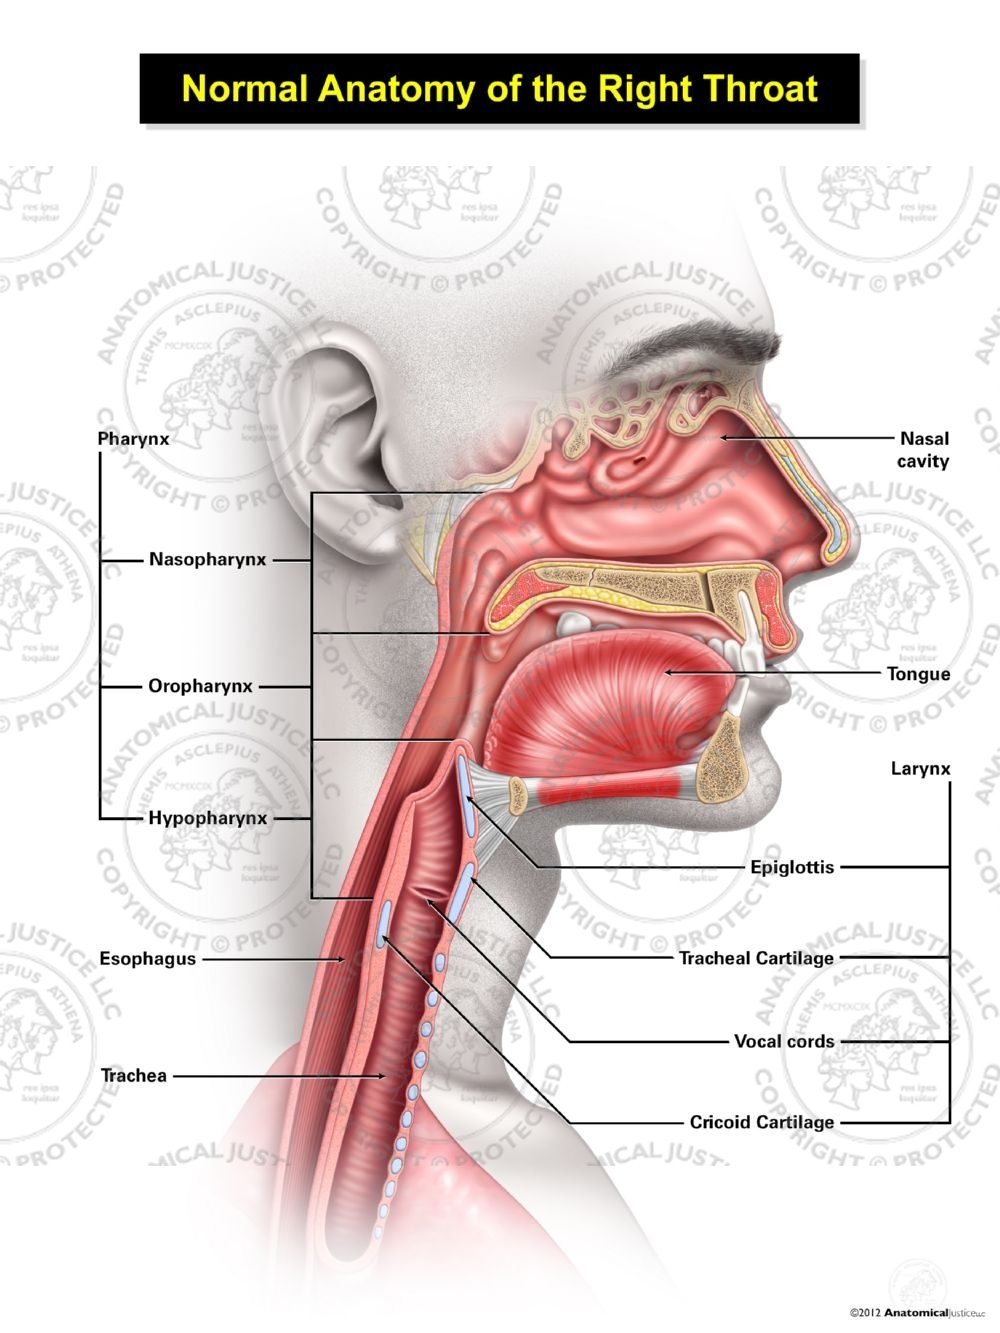 Normal Male Anatomy of the Right Throat